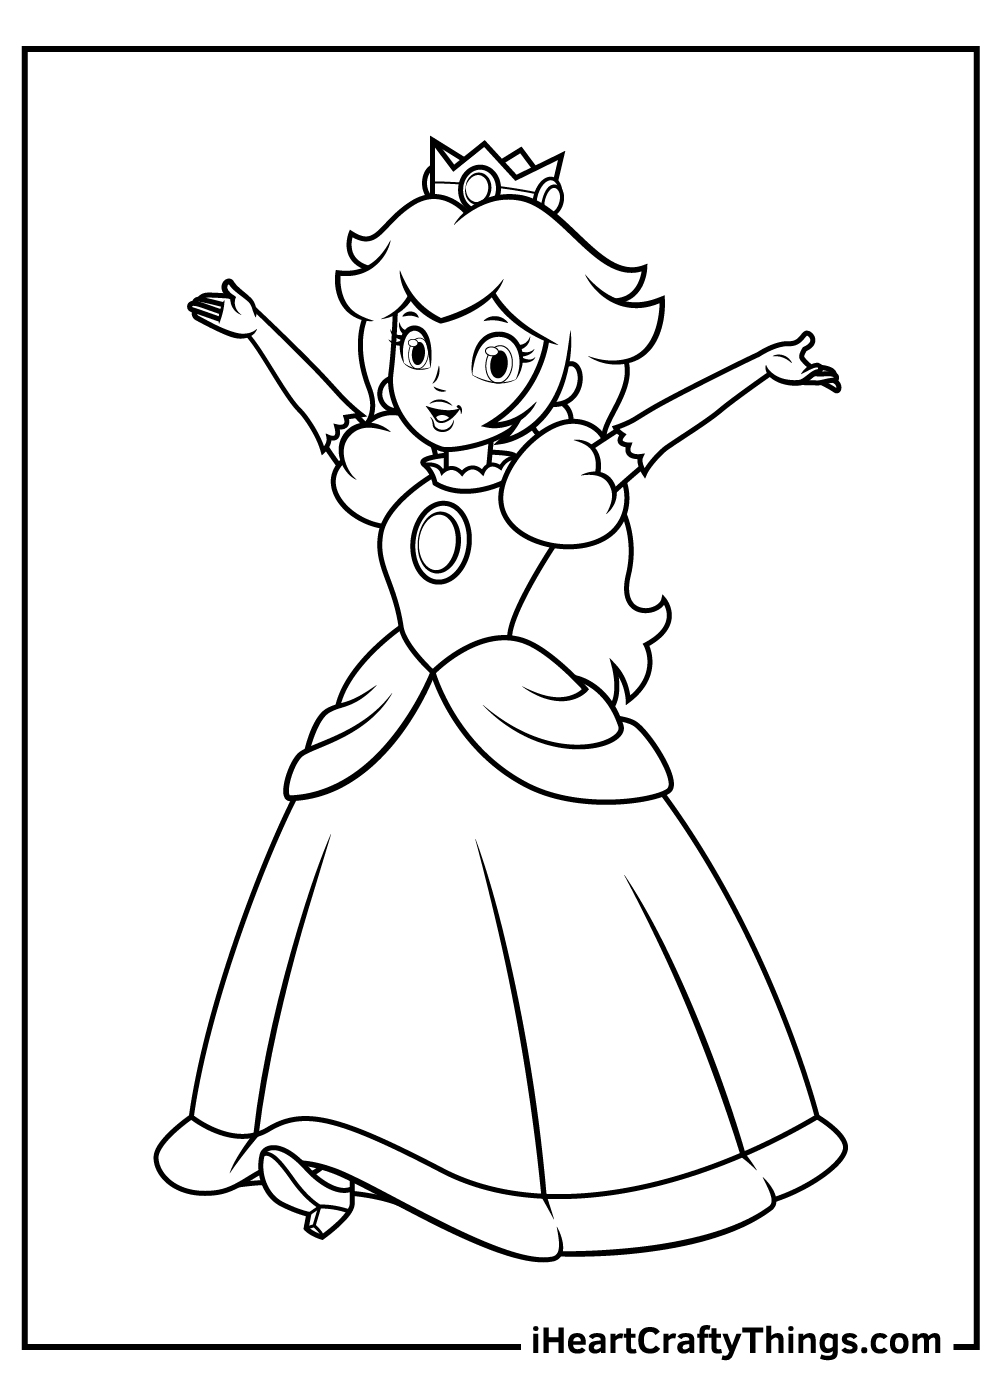 Printable Princess Peach Coloring Pages Updated 20